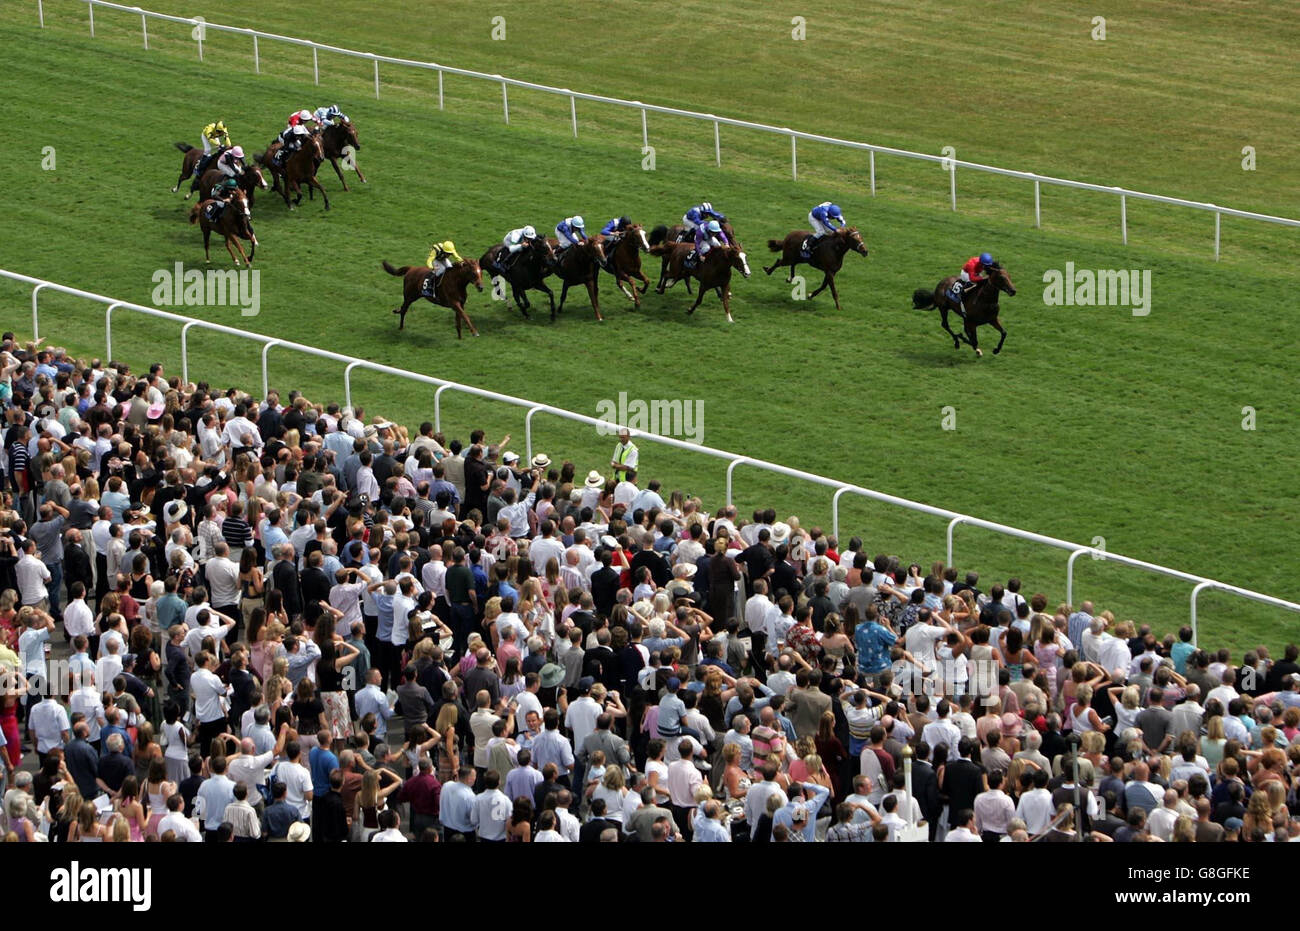 Regal Royale ridden by Mick Kinane leads the field to win the European Breeders Fund Crocker Bulteel Maiden Stakes. Stock Photo